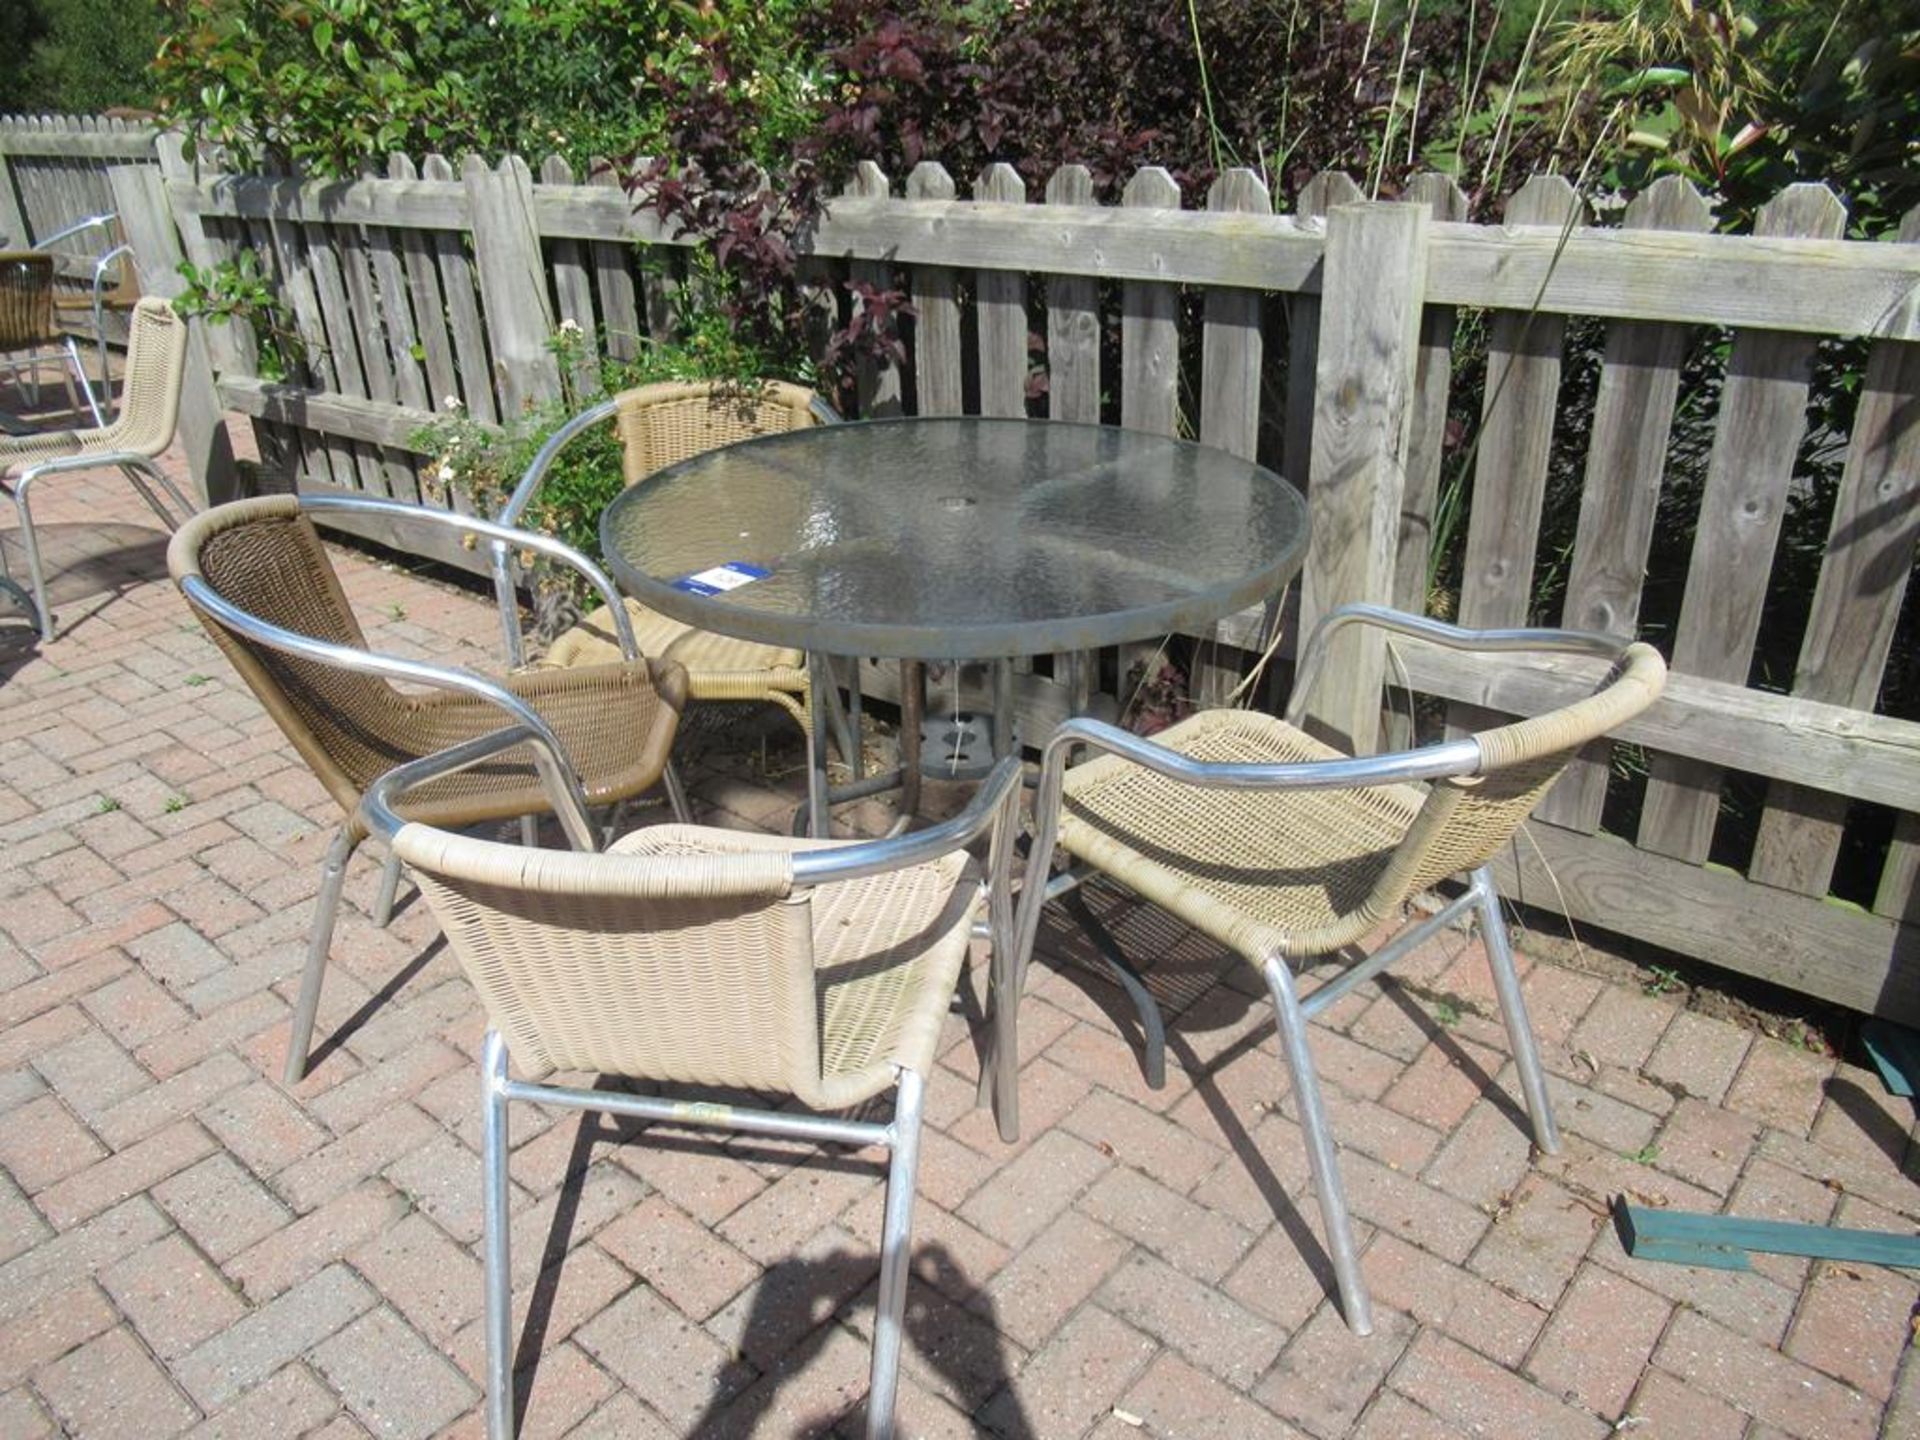 Metal Framed Circular Glass Top Garden Table and 4 x Matching Metal Framed Garden Chairs - Image 4 of 4